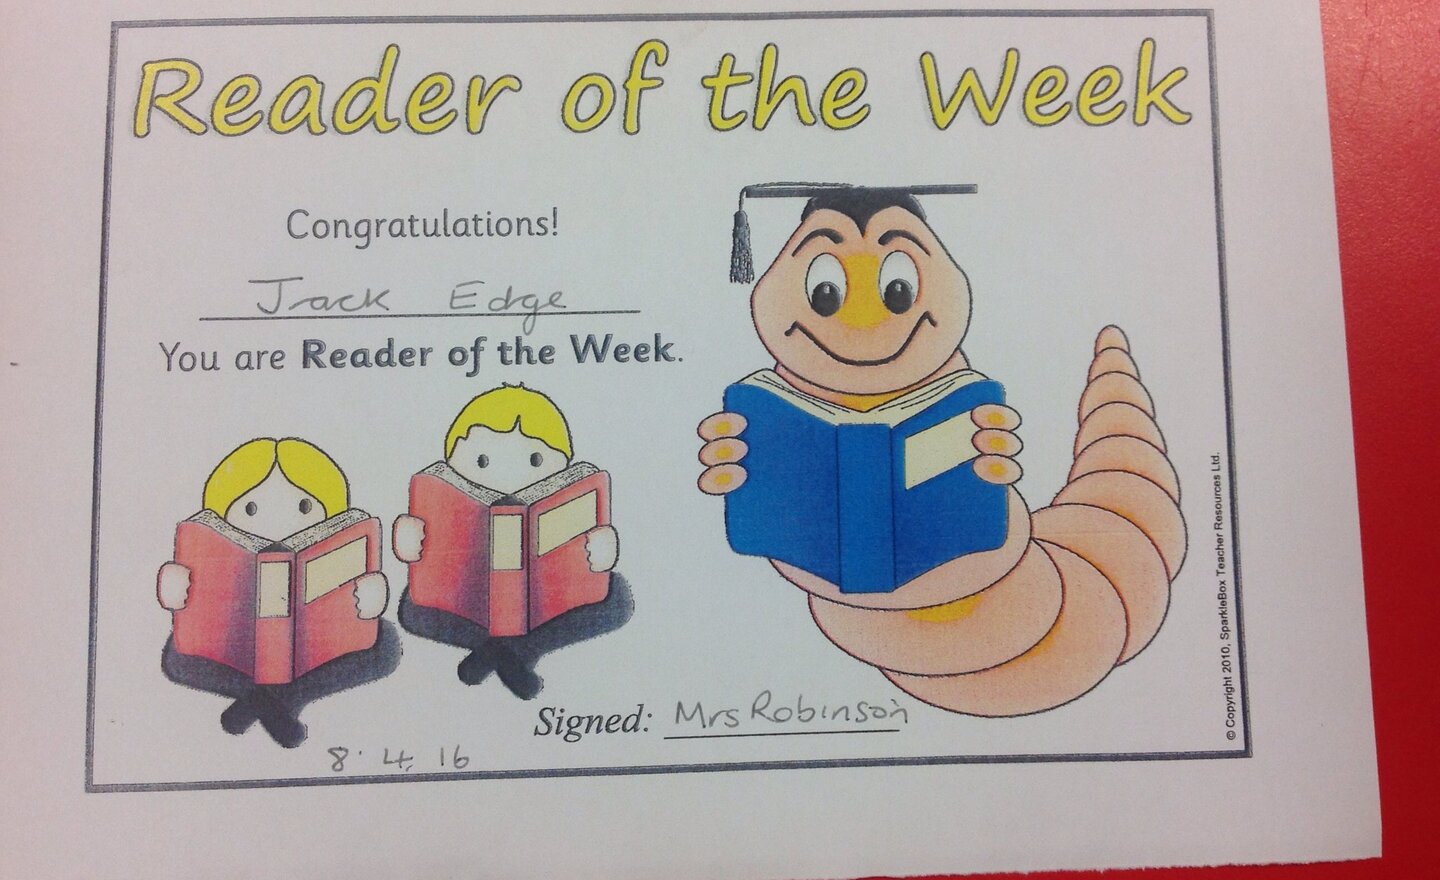 Image of Reader of the Week